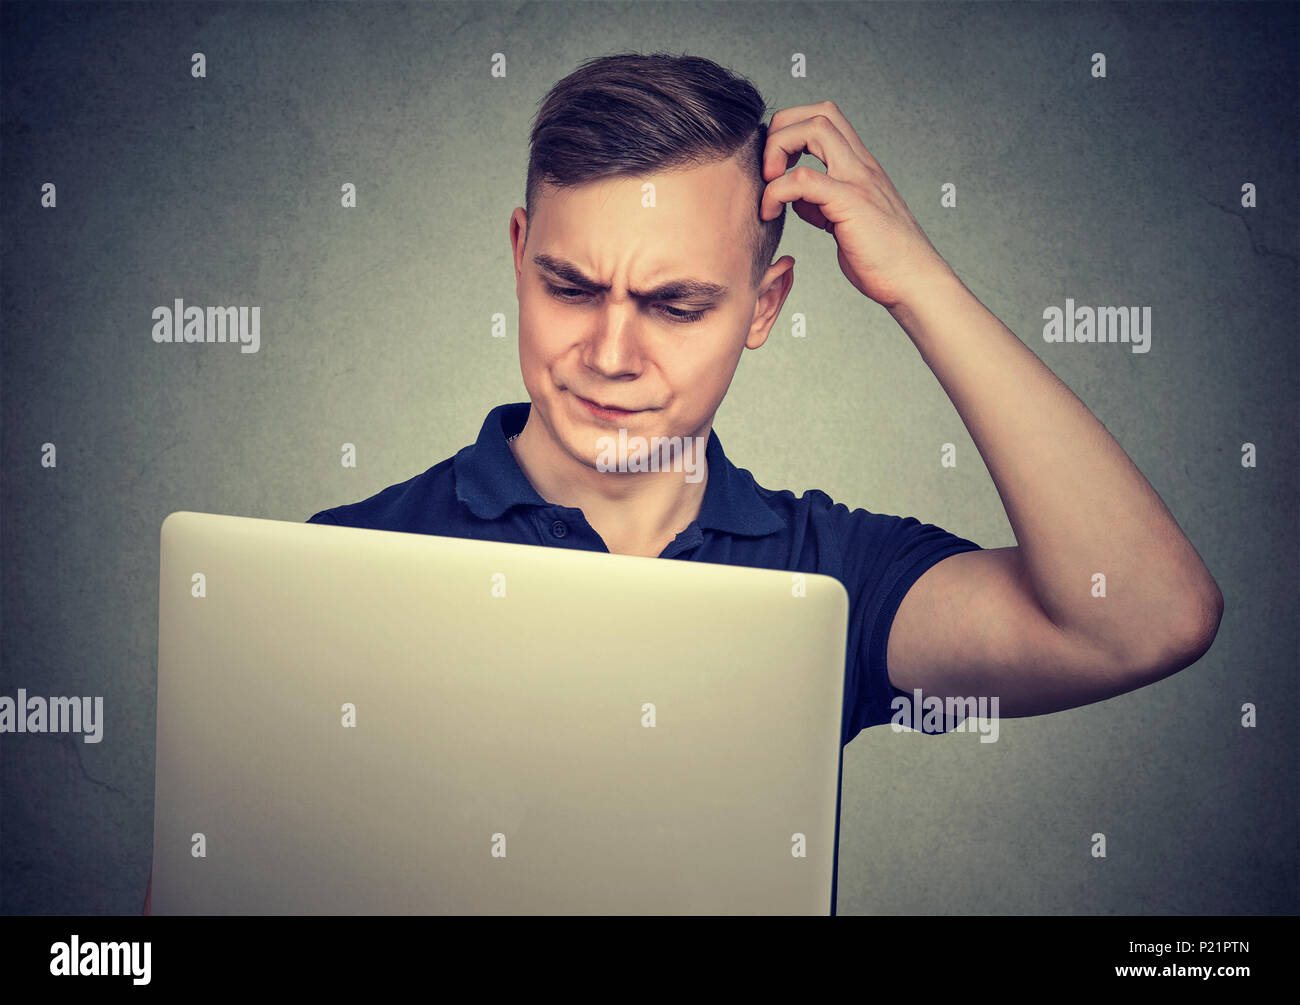 Young casual man looking perplexed while using laptop having difficulties with device. Stock Photo